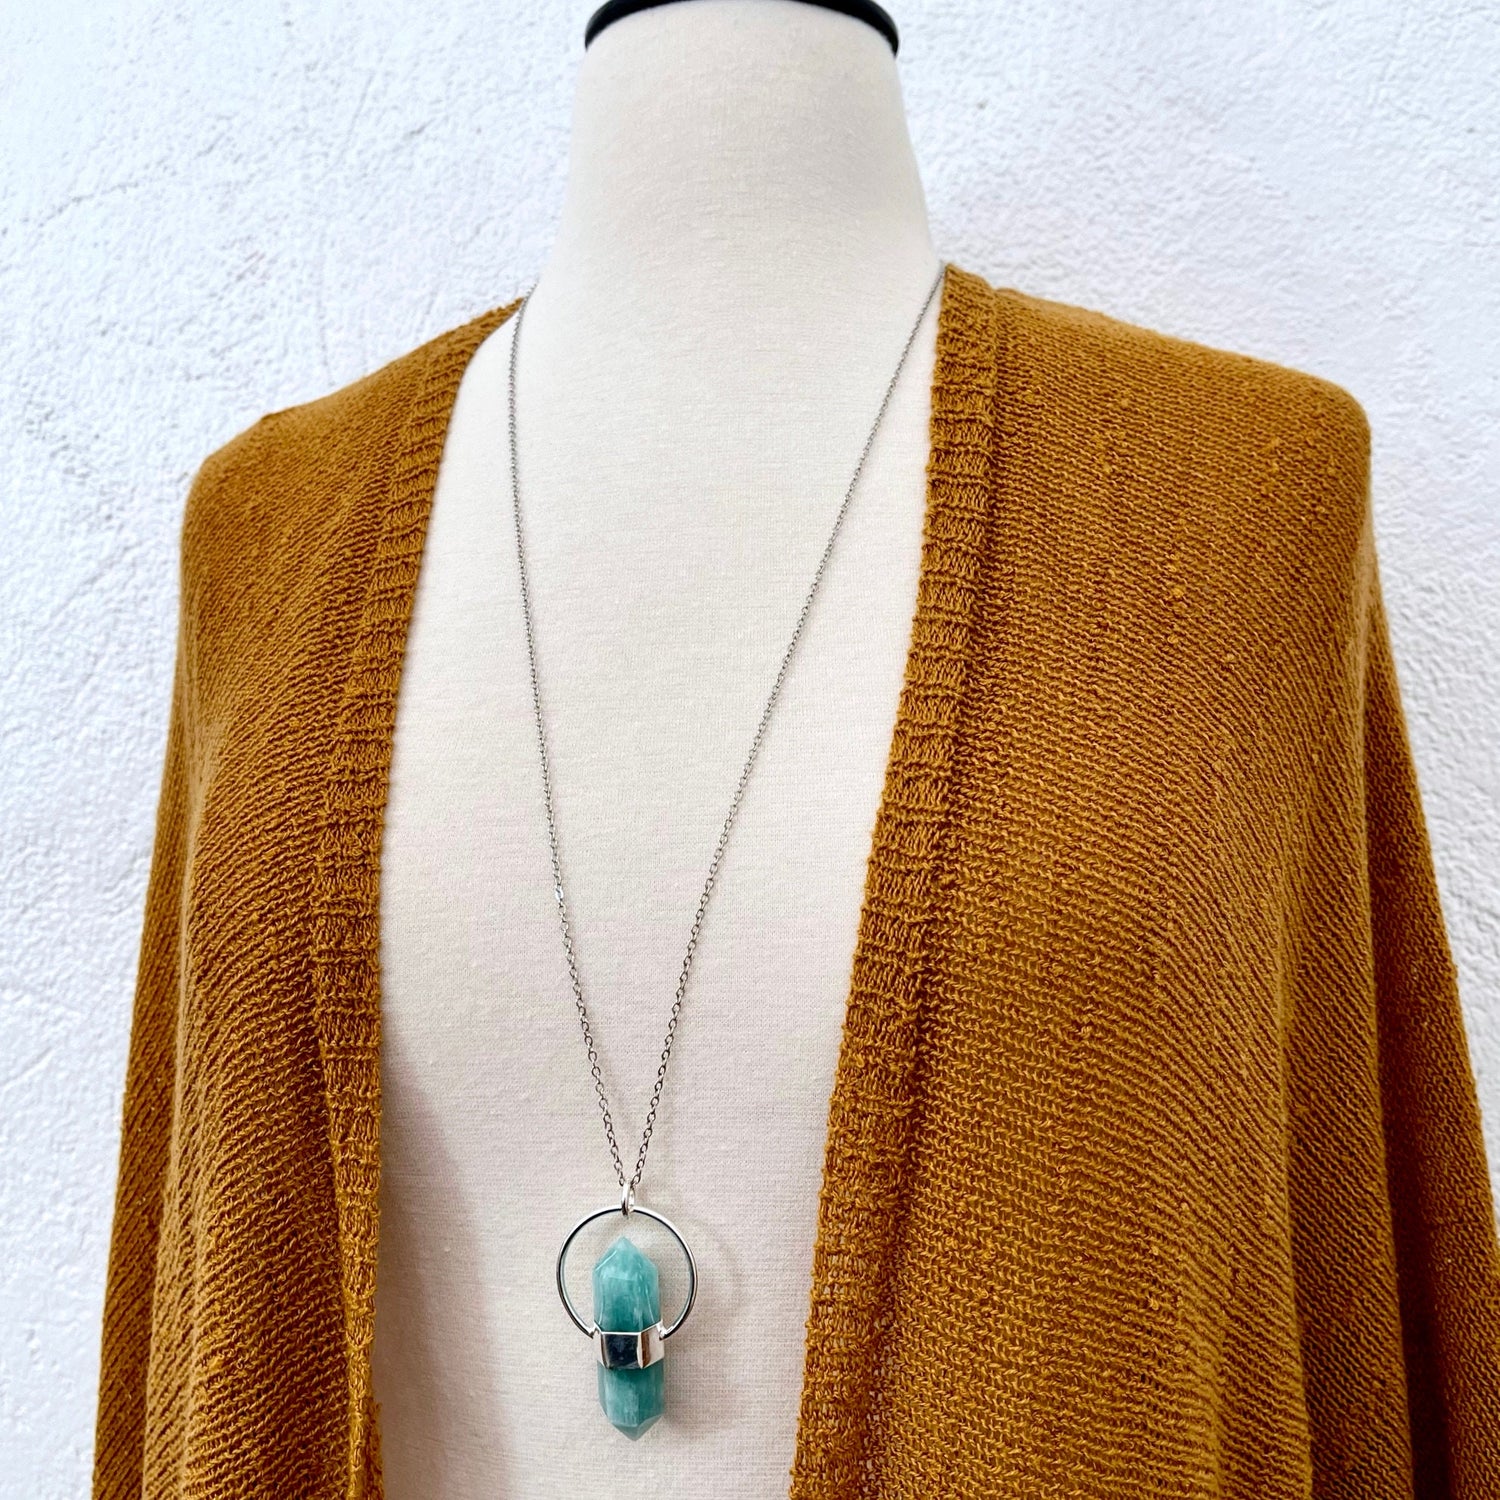 Blue Amazonite Crystal Point Necklace in Sterling Silver  -Designed by FOXLARK Collection